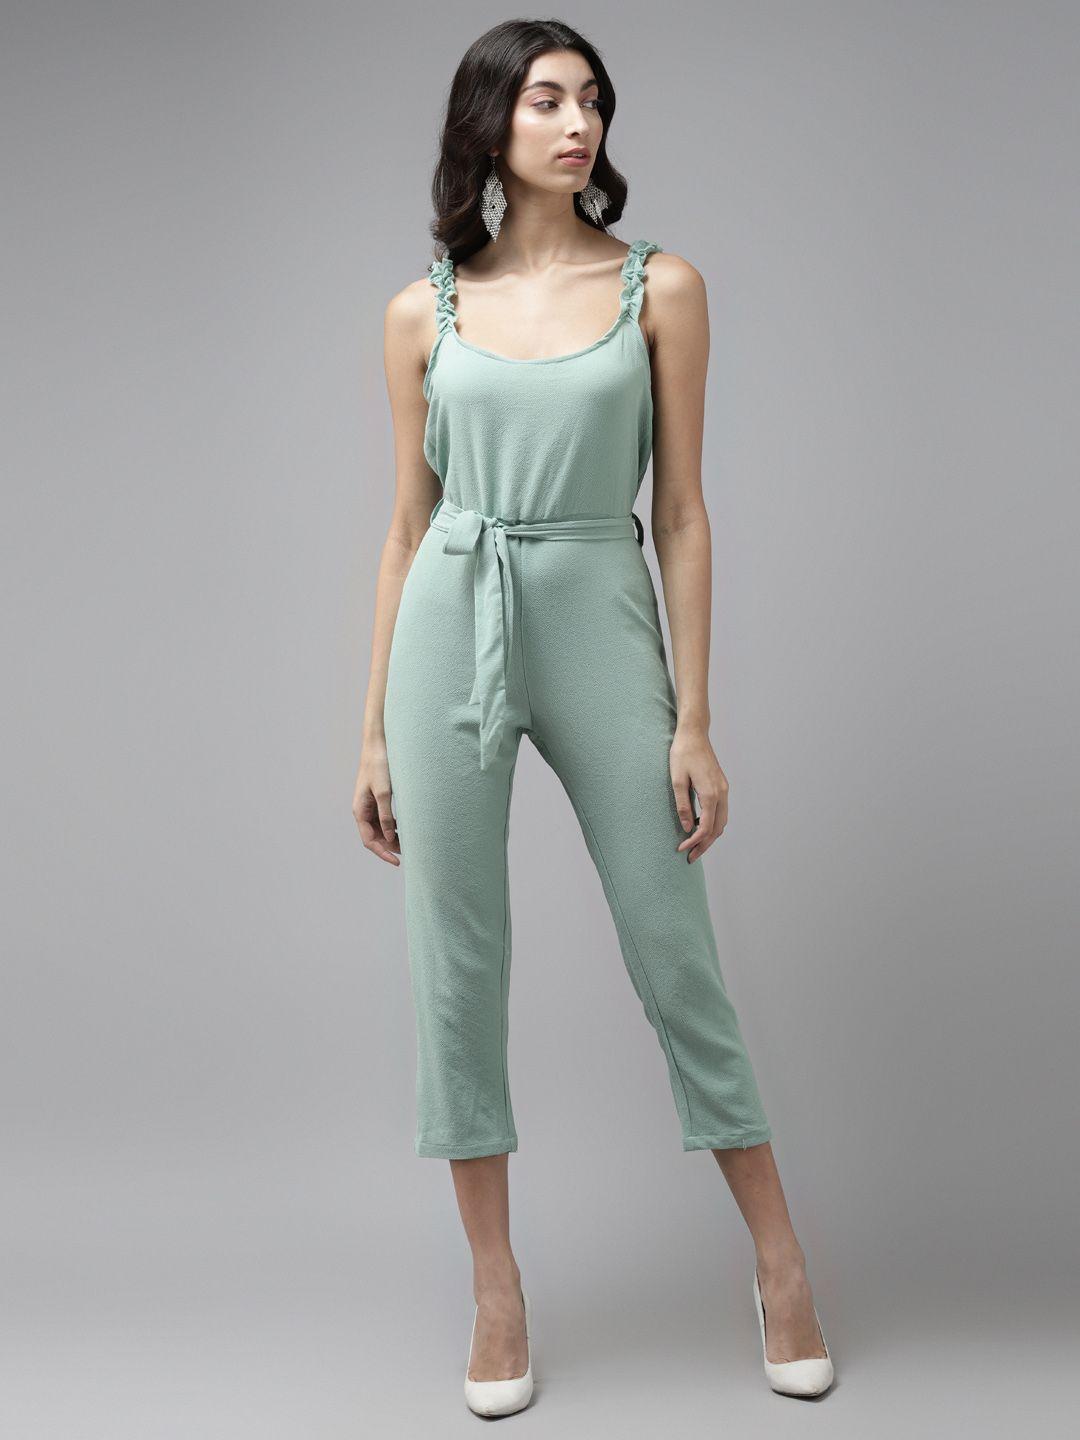 cayman-women-sea-green-solid-cropped-basic-jumpsuit-with-belt